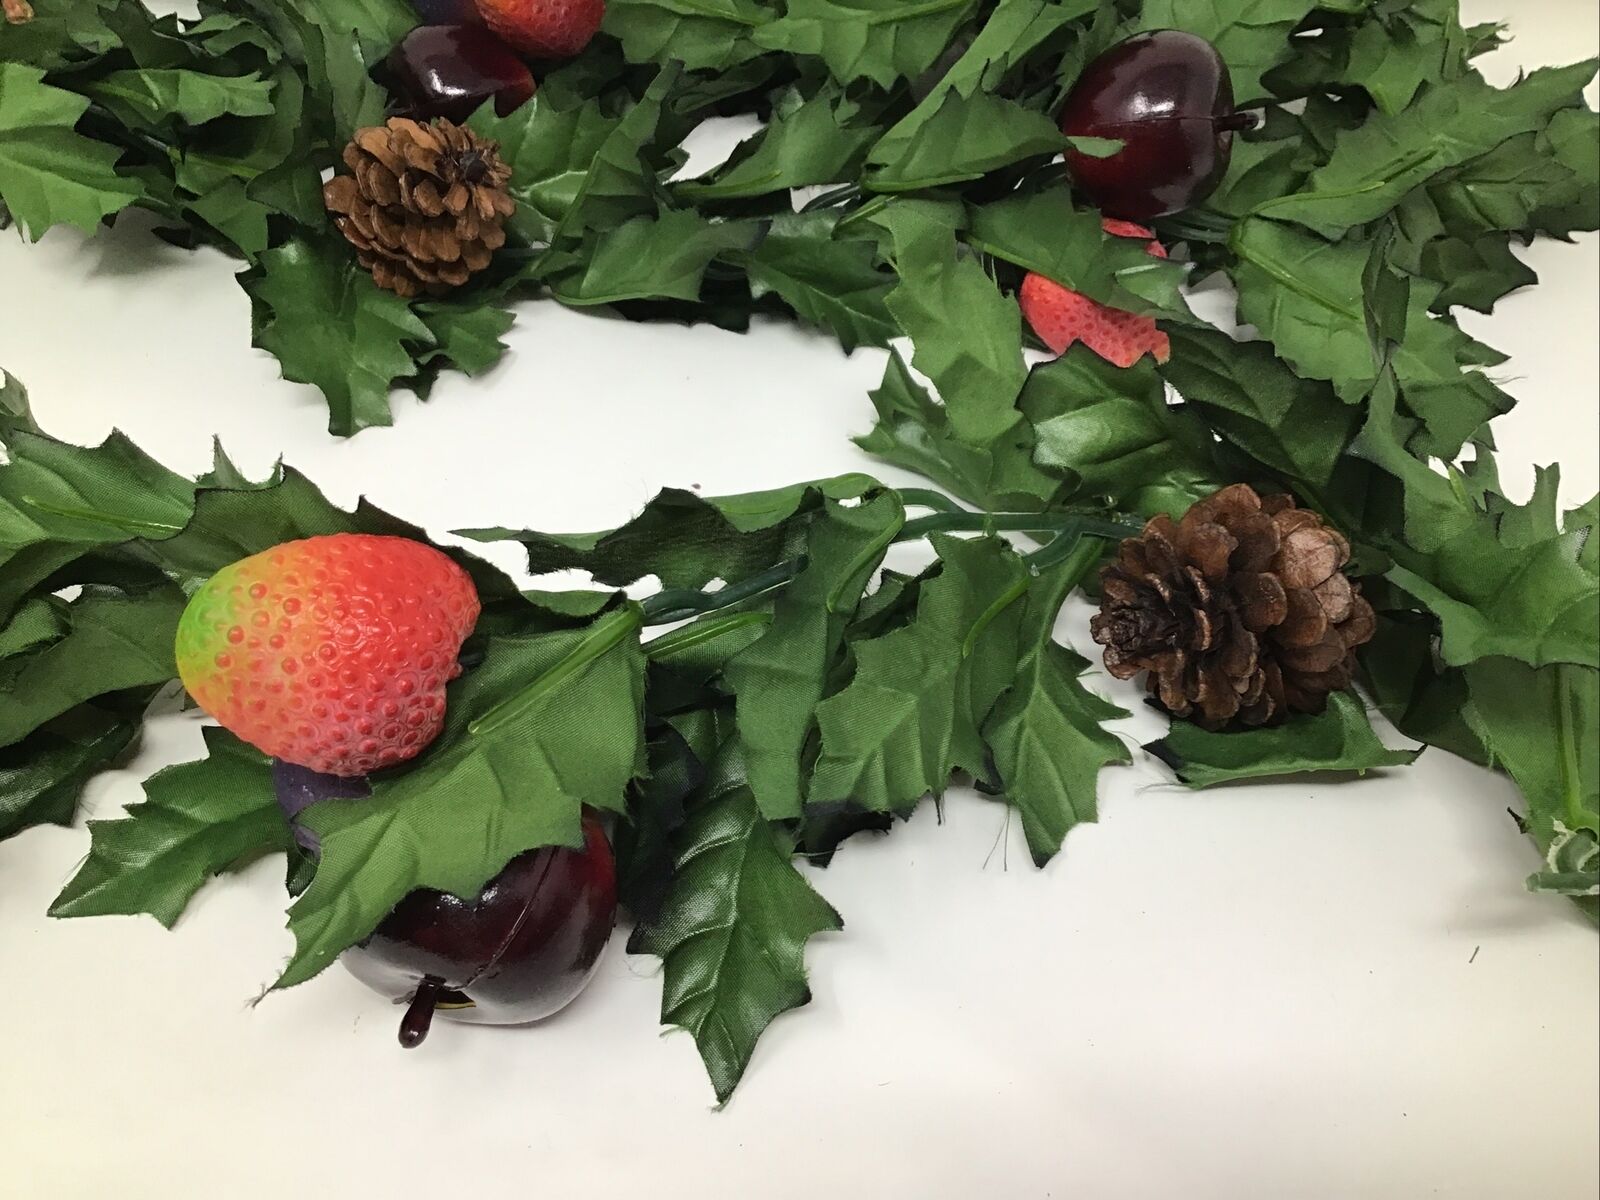 Artificial Silk Holly Leaf Garland Pinecones Apples Strawberries Plums 100” Long